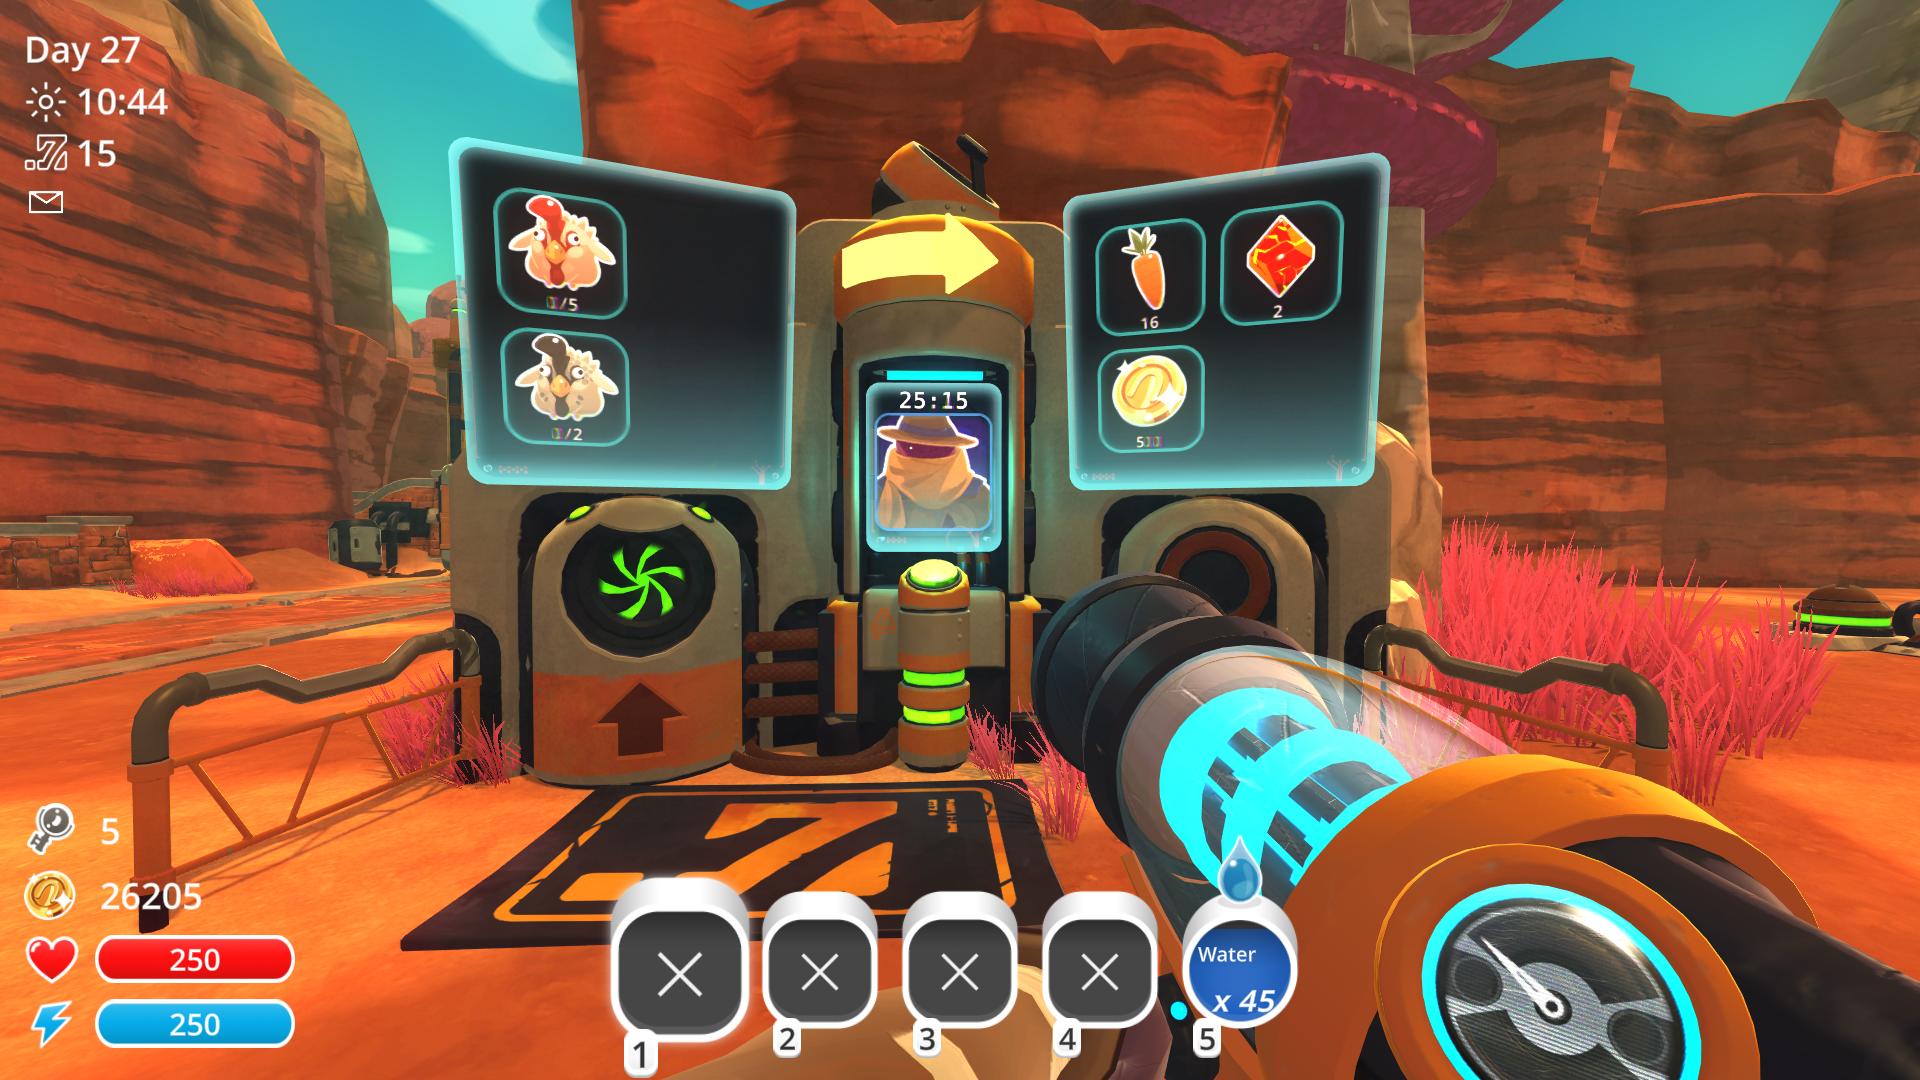 Slime Rancher multiplayer – is it possible?